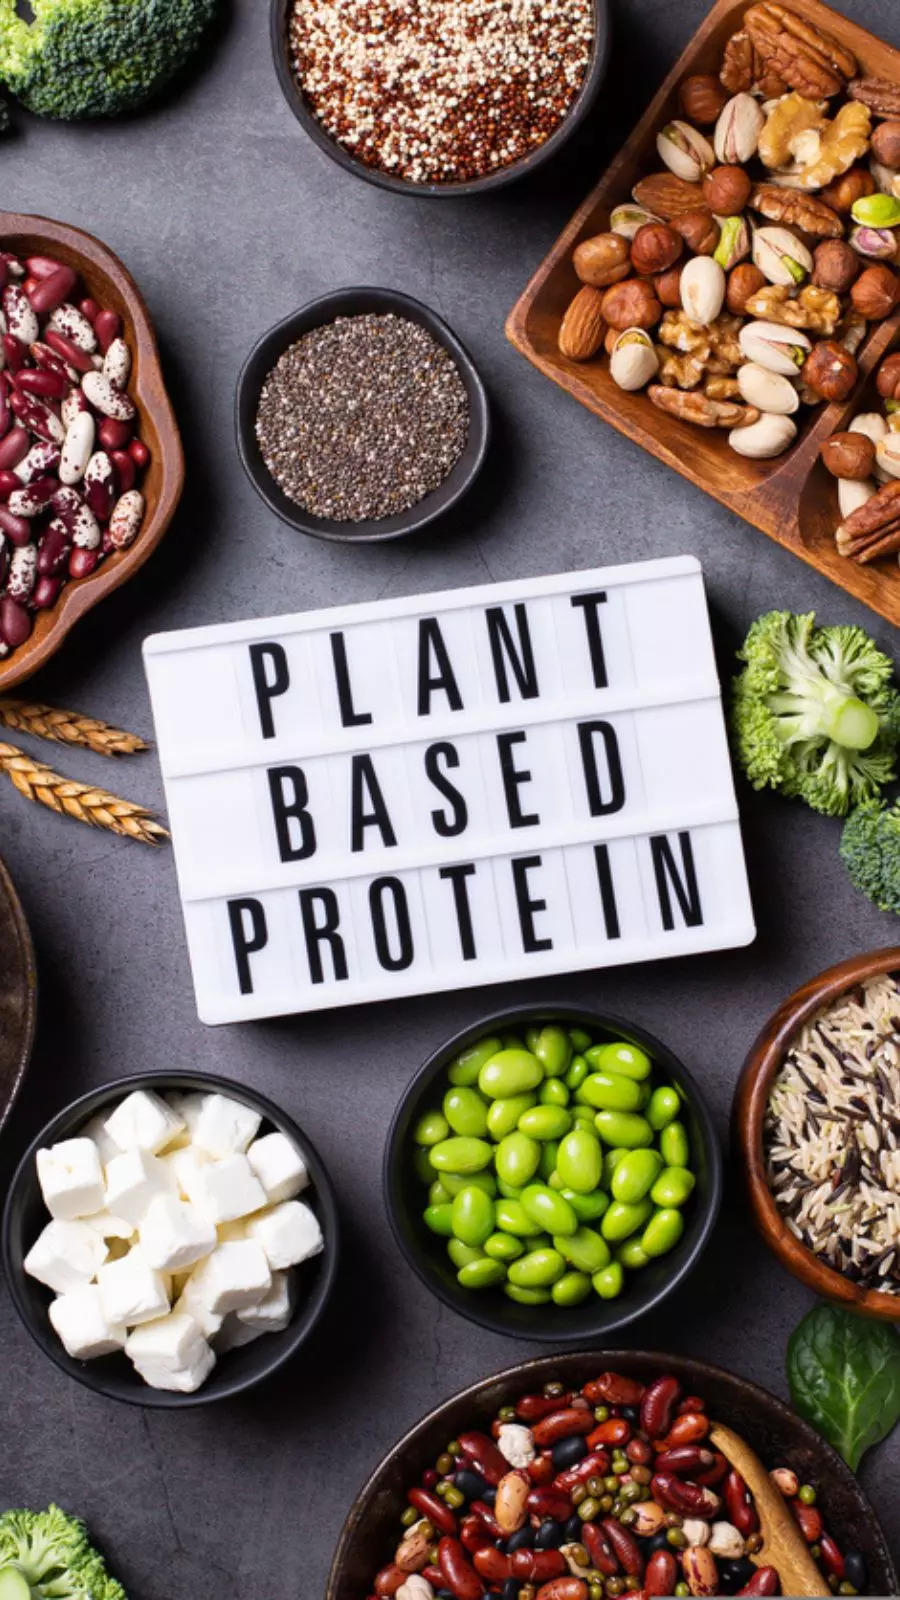 10 most protein-rich plant based foods